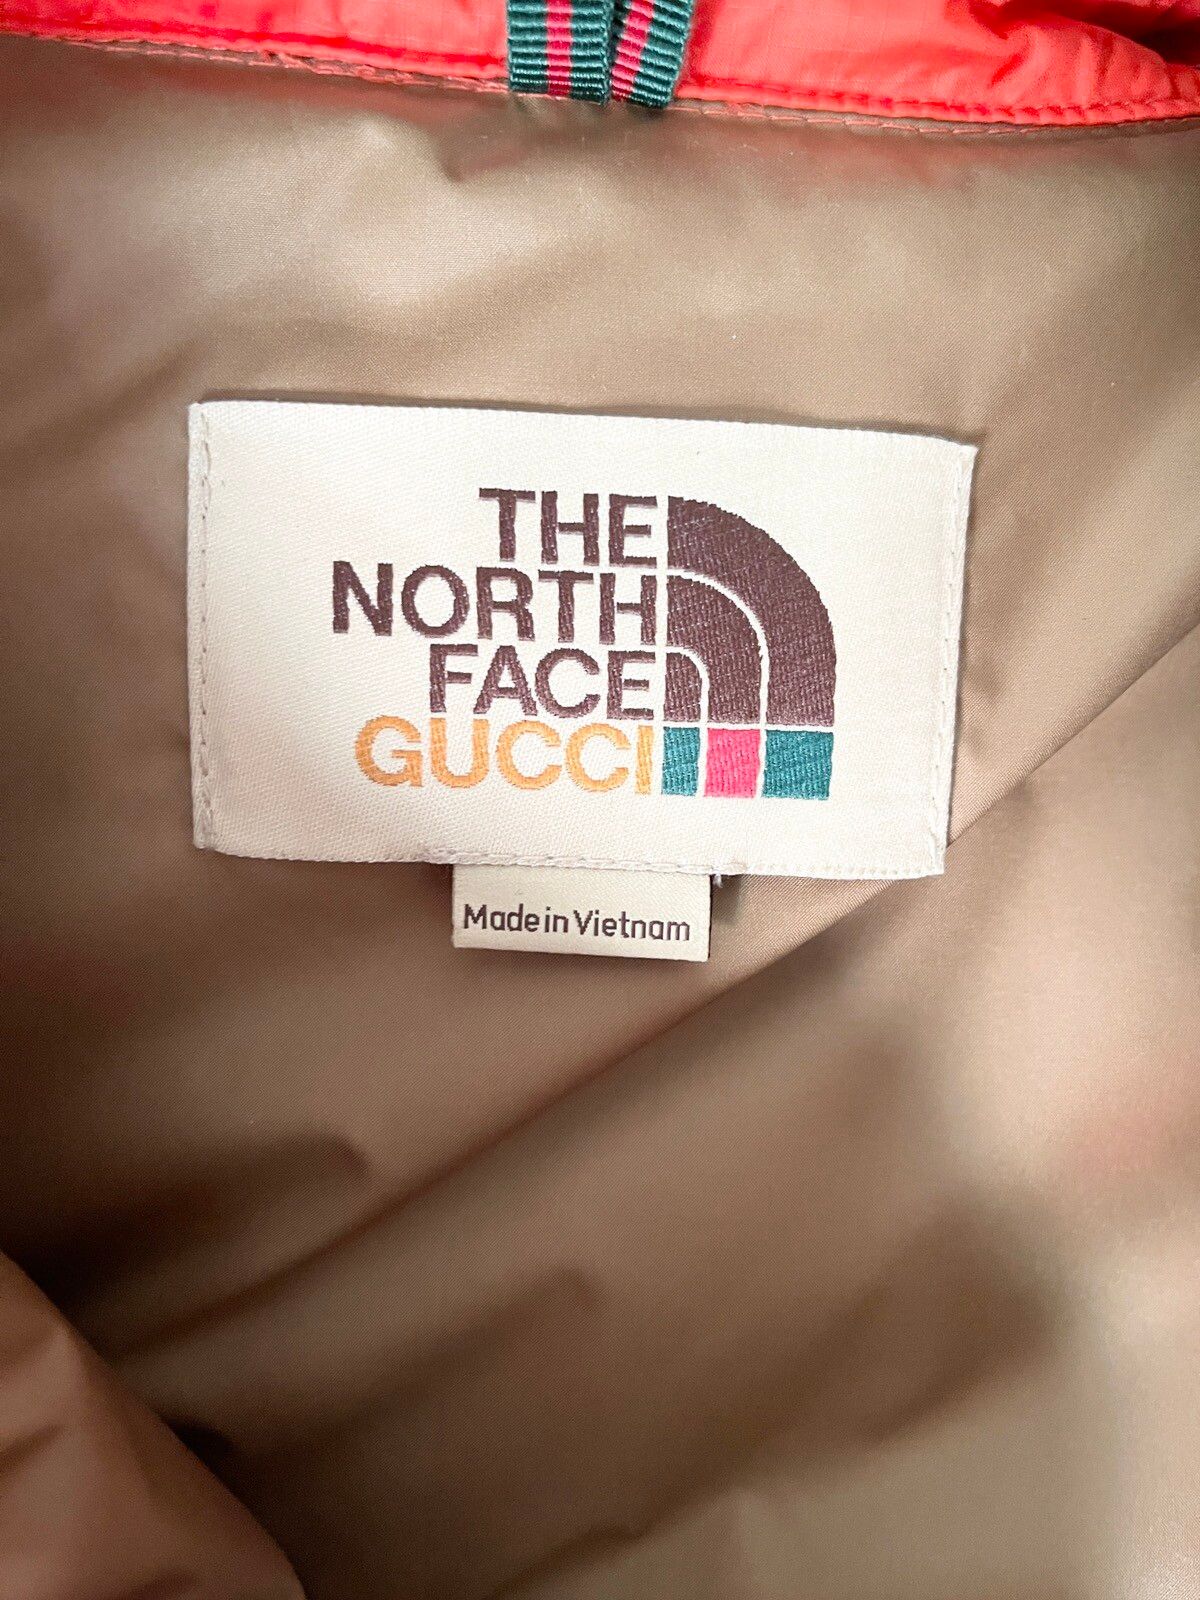 GRAIL! 2021 Gucci x The North Face Puffer Jacket in Large - 14